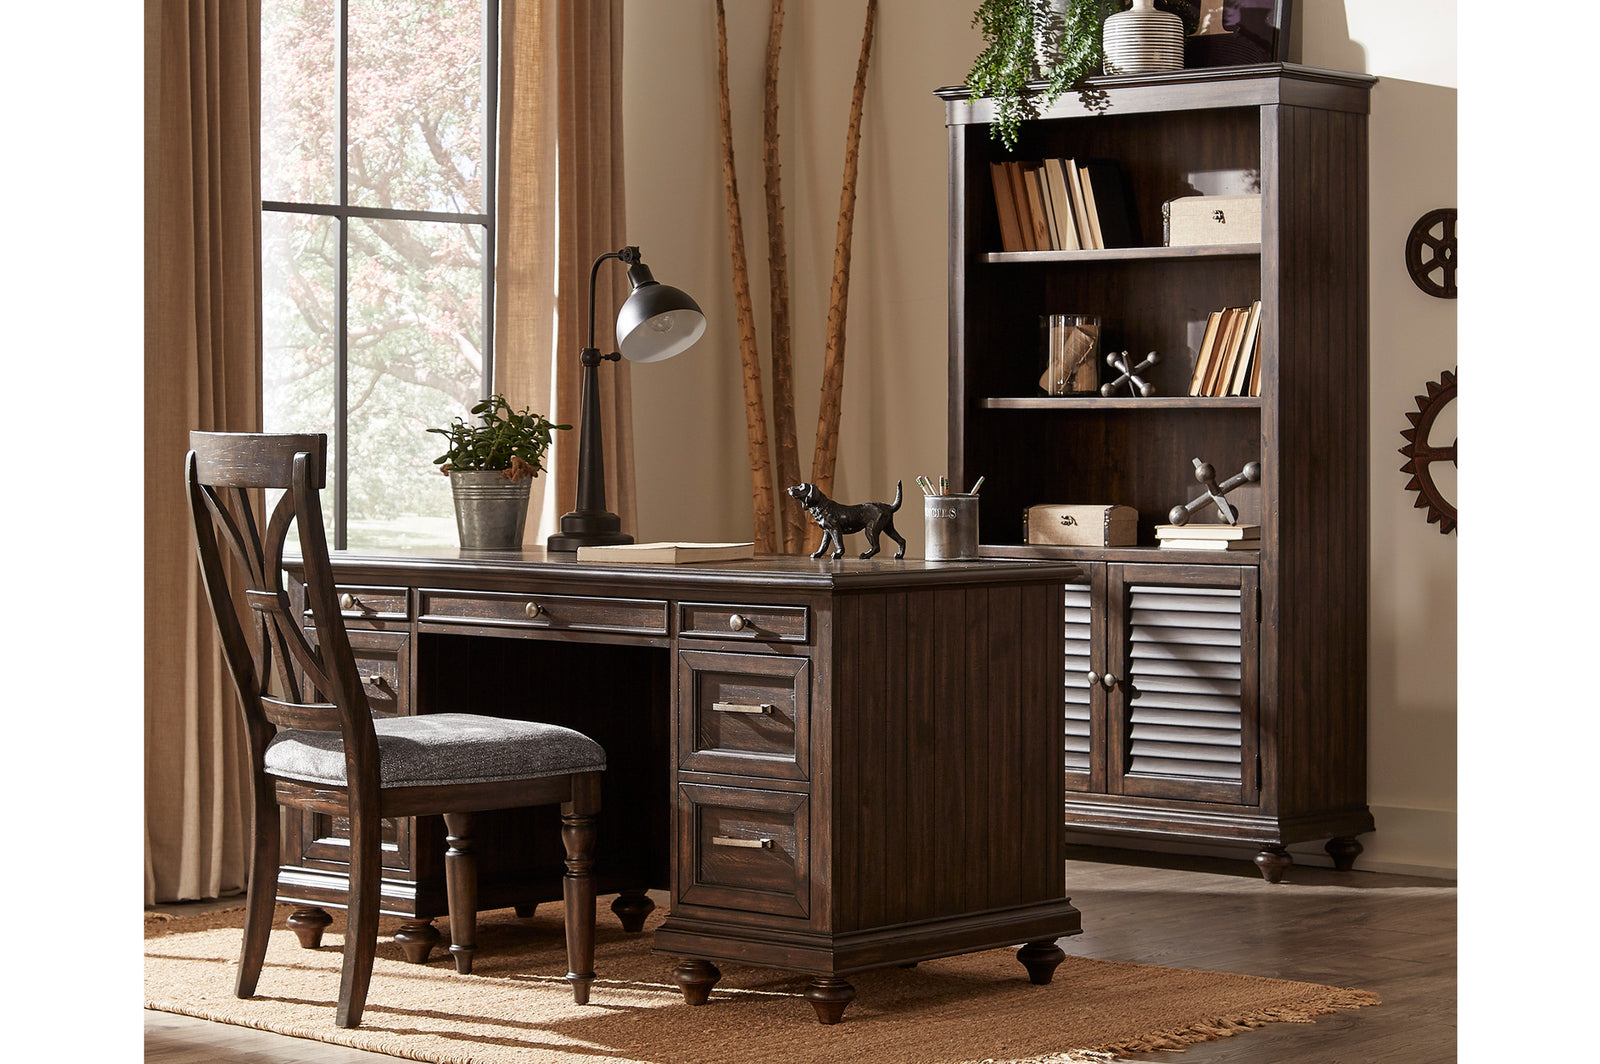 Cardano Charcoal Modern Tranisitional Traditional Acacia Solids And Veneers Executive Desk